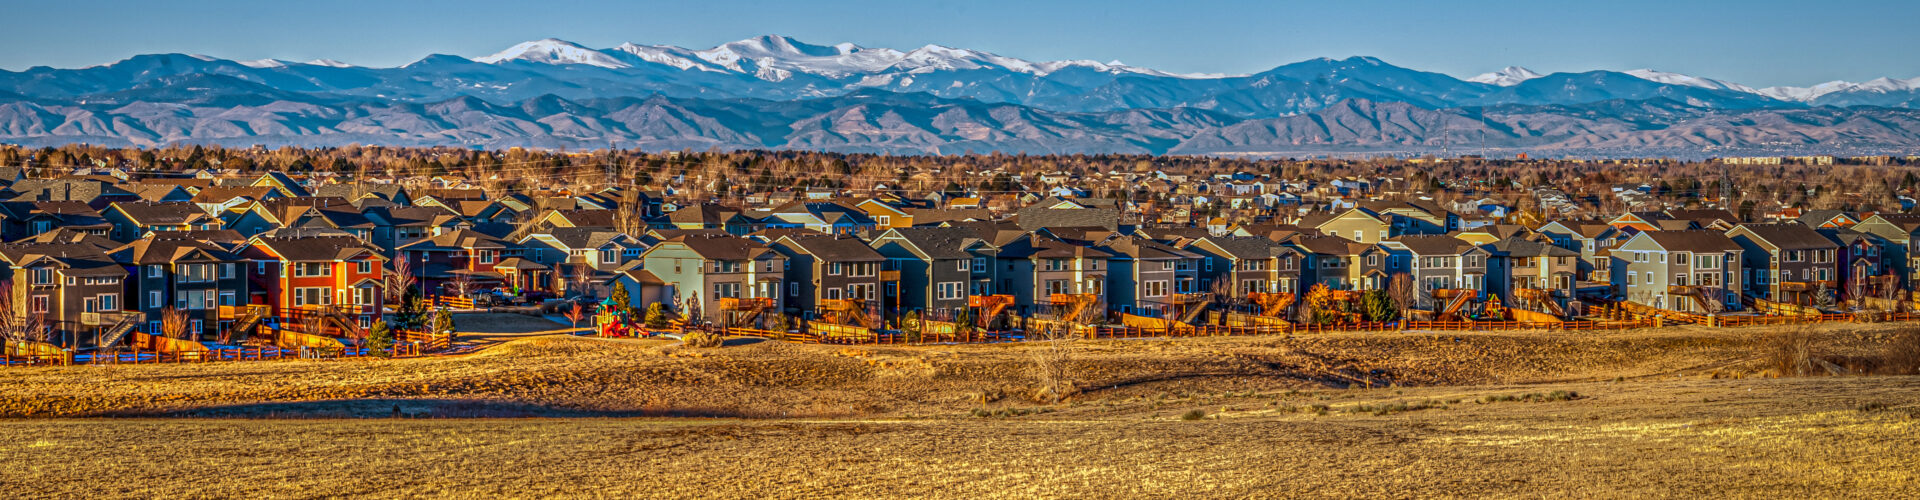 Lots of houses in residential neighborhood with the Rocky Mountains in the background.